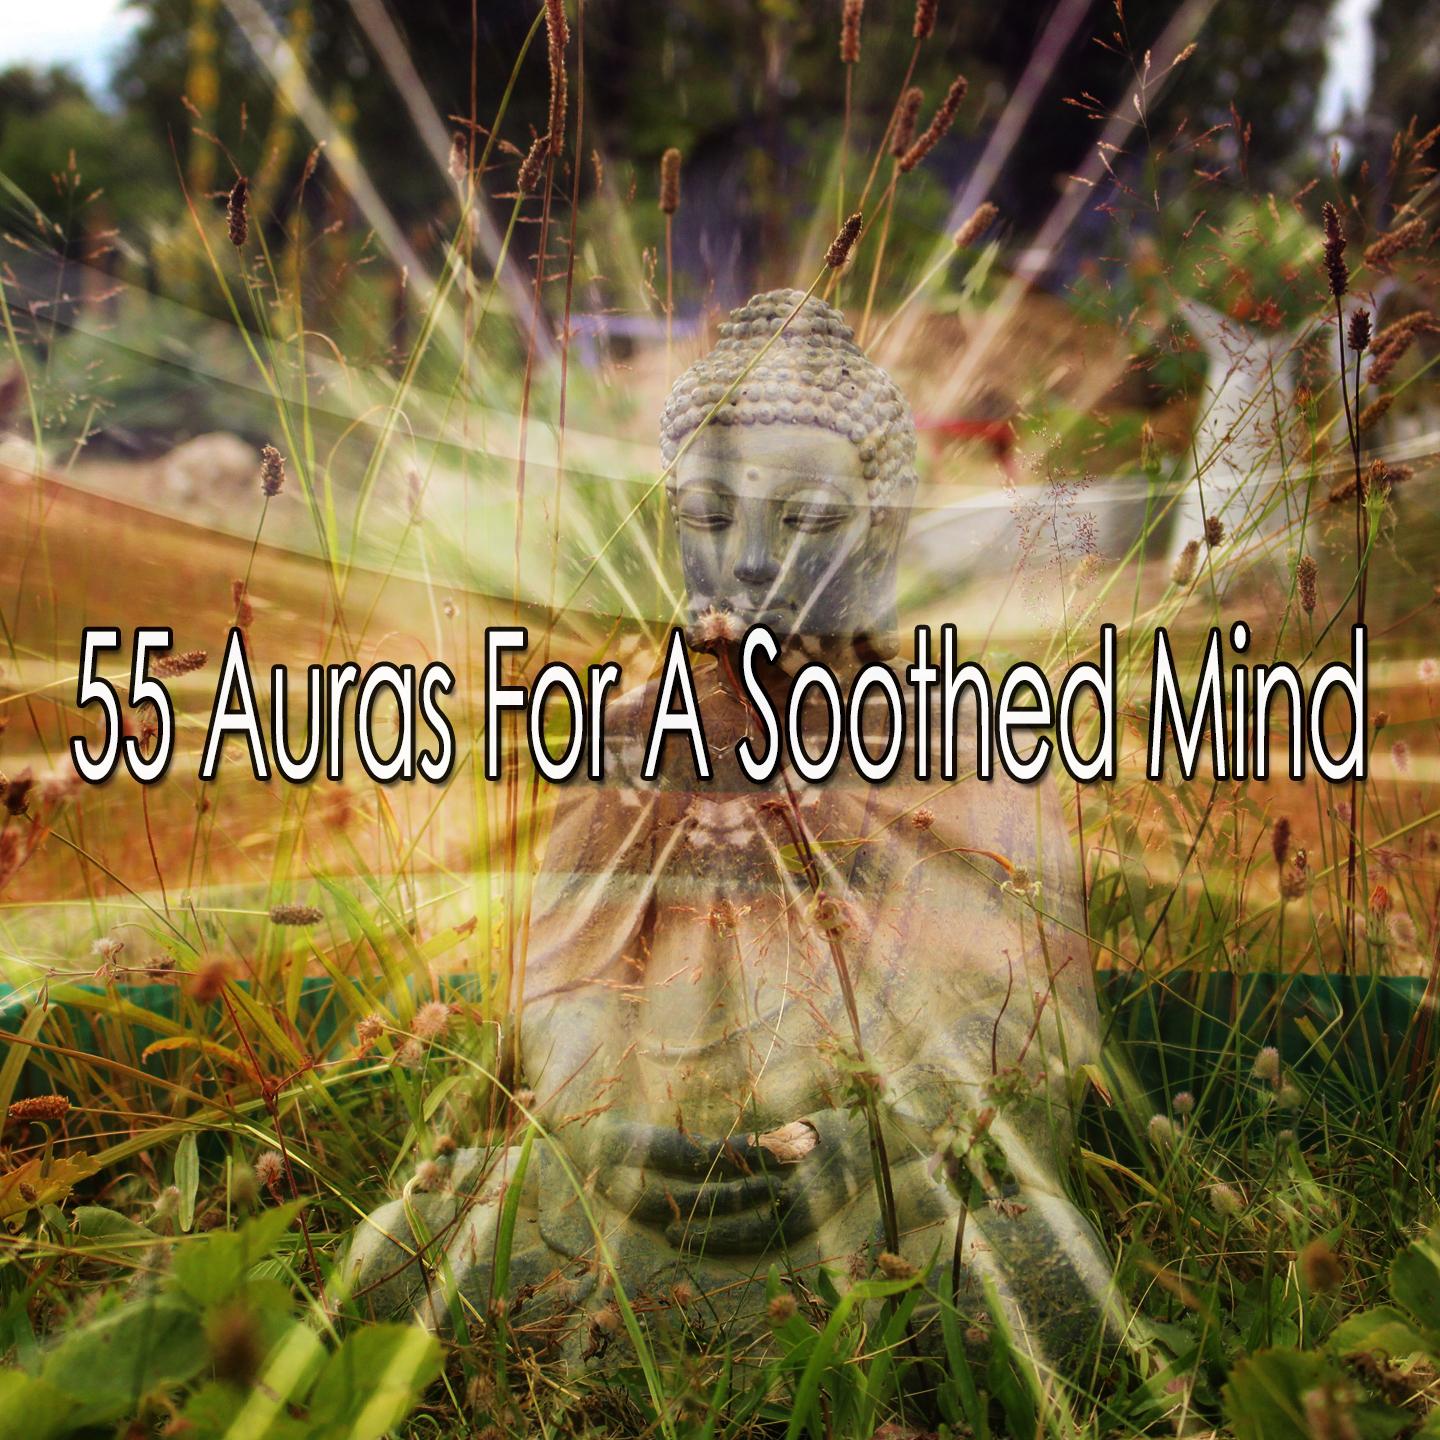 55 Auras for a Soothed Mind